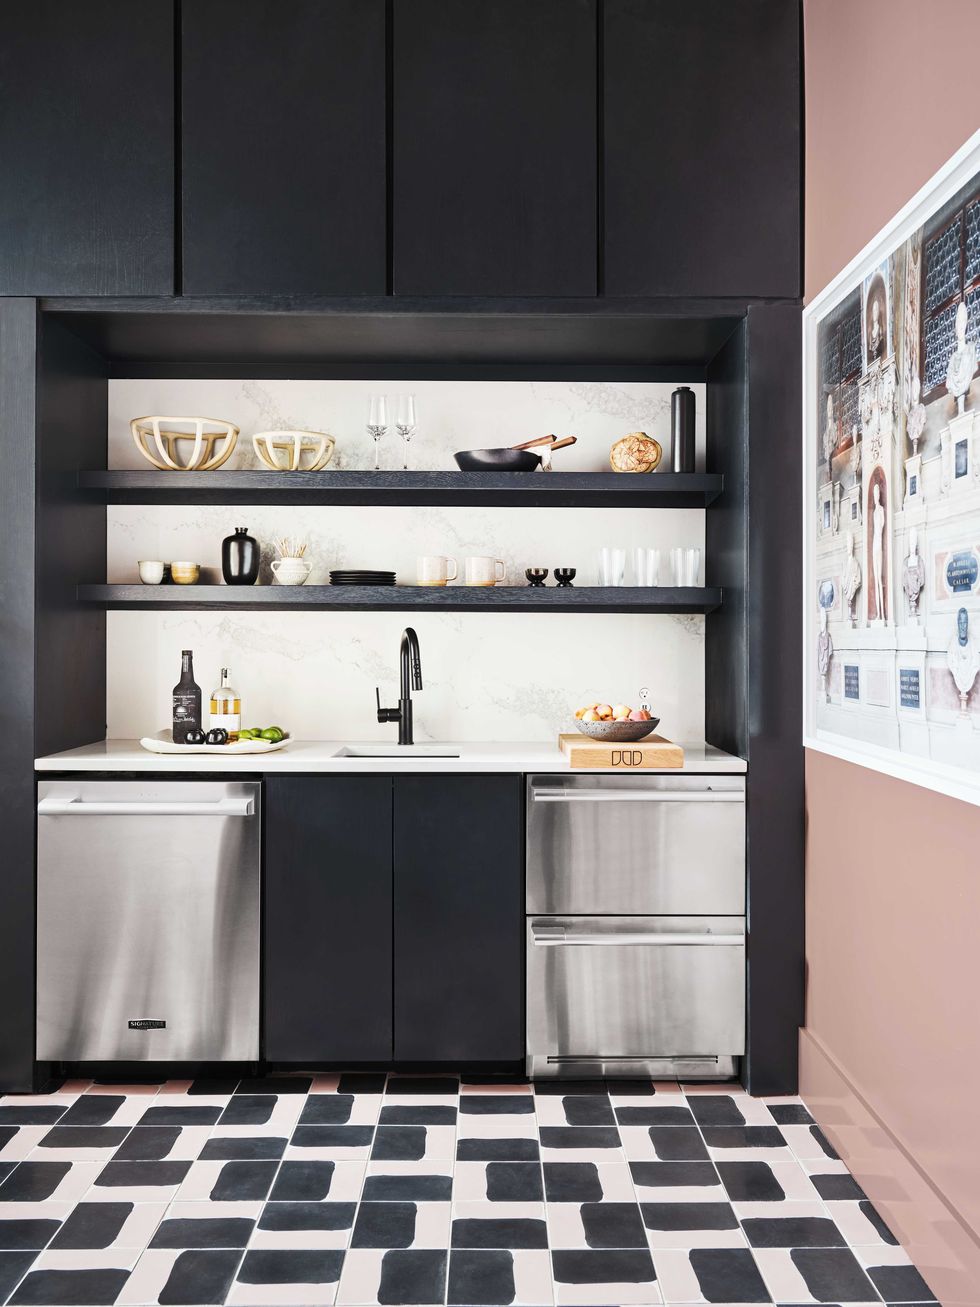 wet bar, pink walls, stainless steel appliances, black cabinets and black shelving